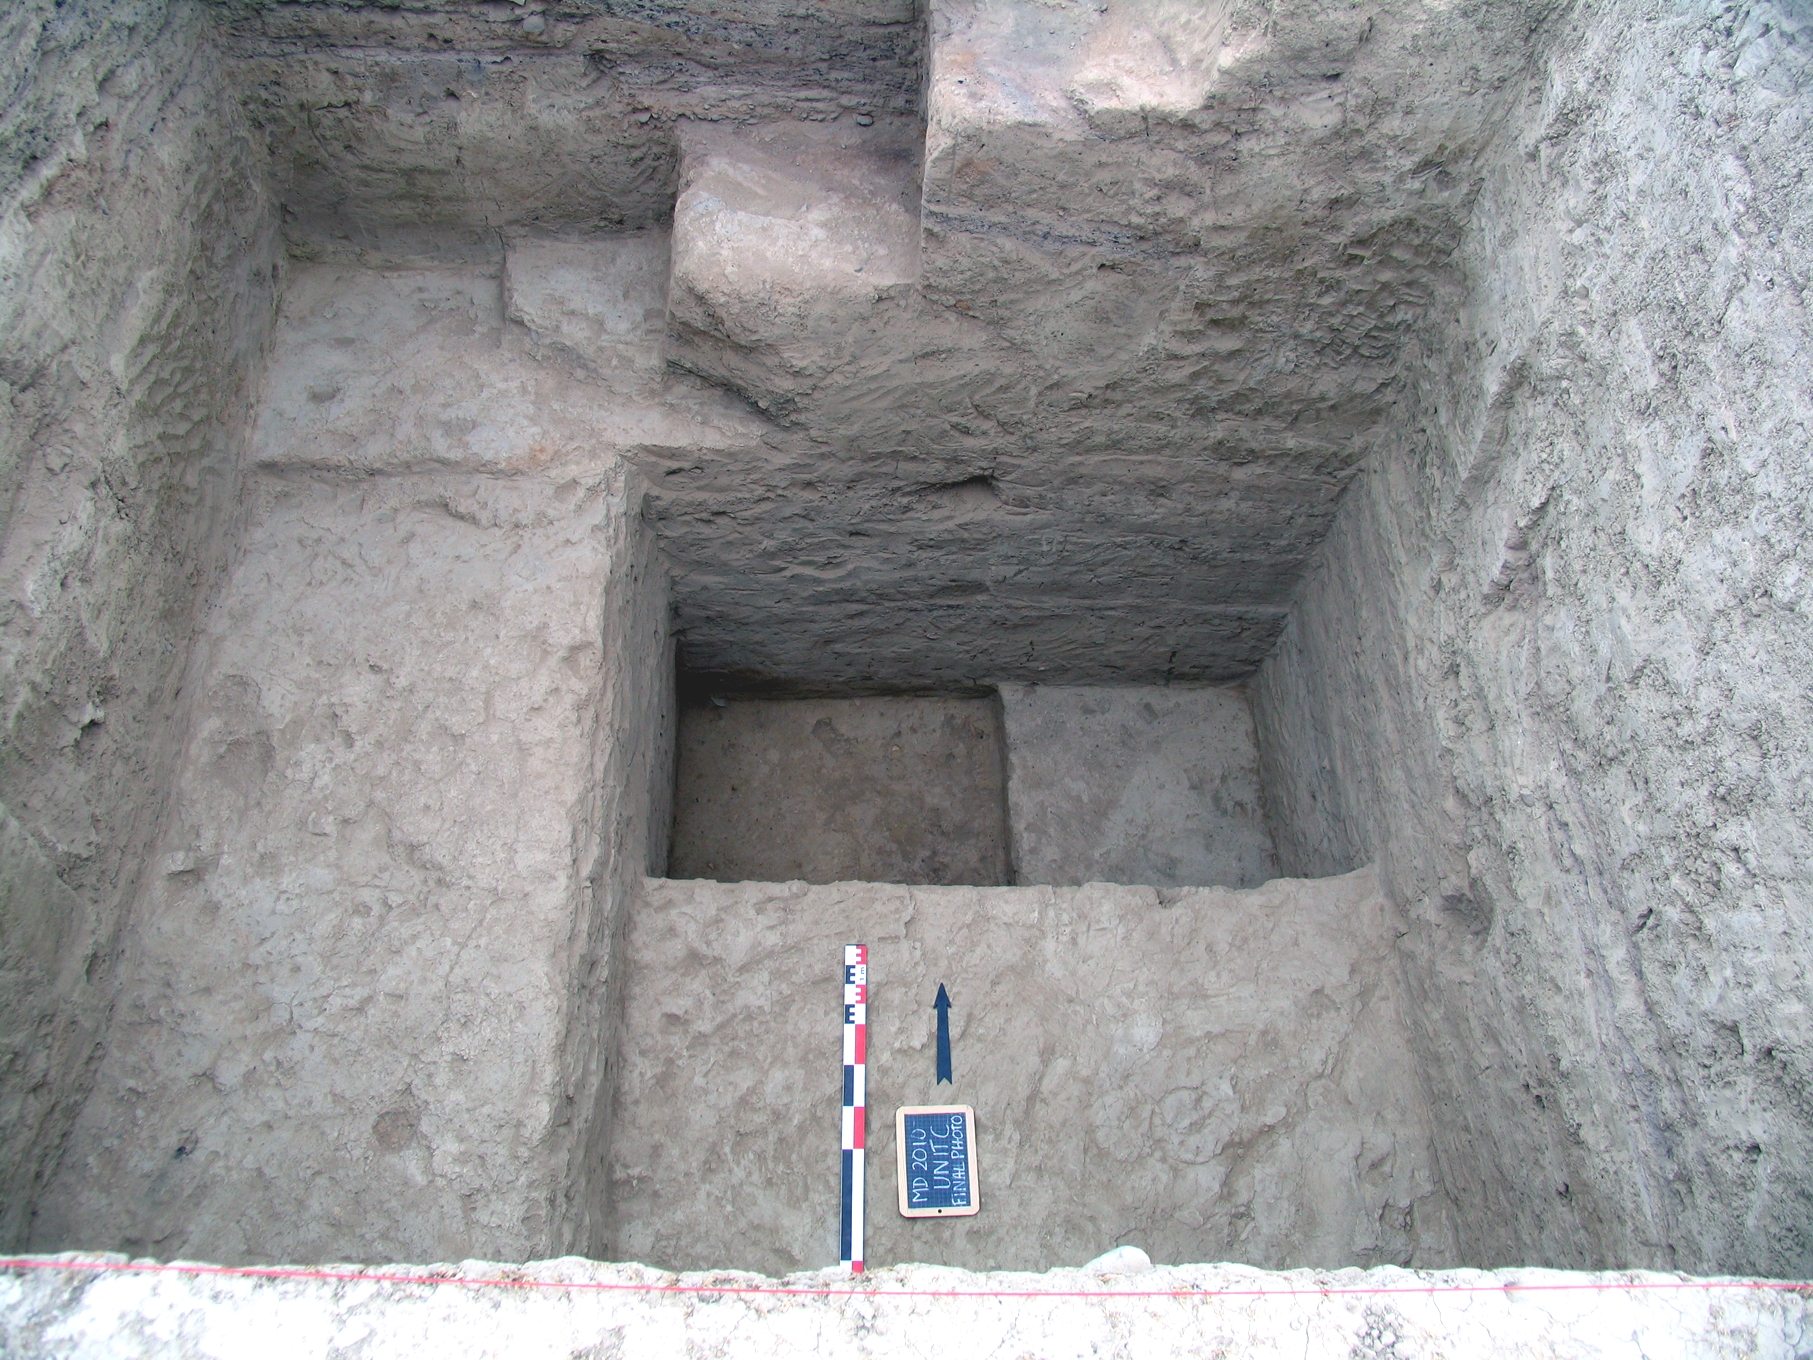 A view of the deep sounding in Unit C at the end of the 2010 excavation season. The sondage revealed both Aeneolithic and Neolithic occupation levels. The latter consisted primarily of ephemeral surfaces.